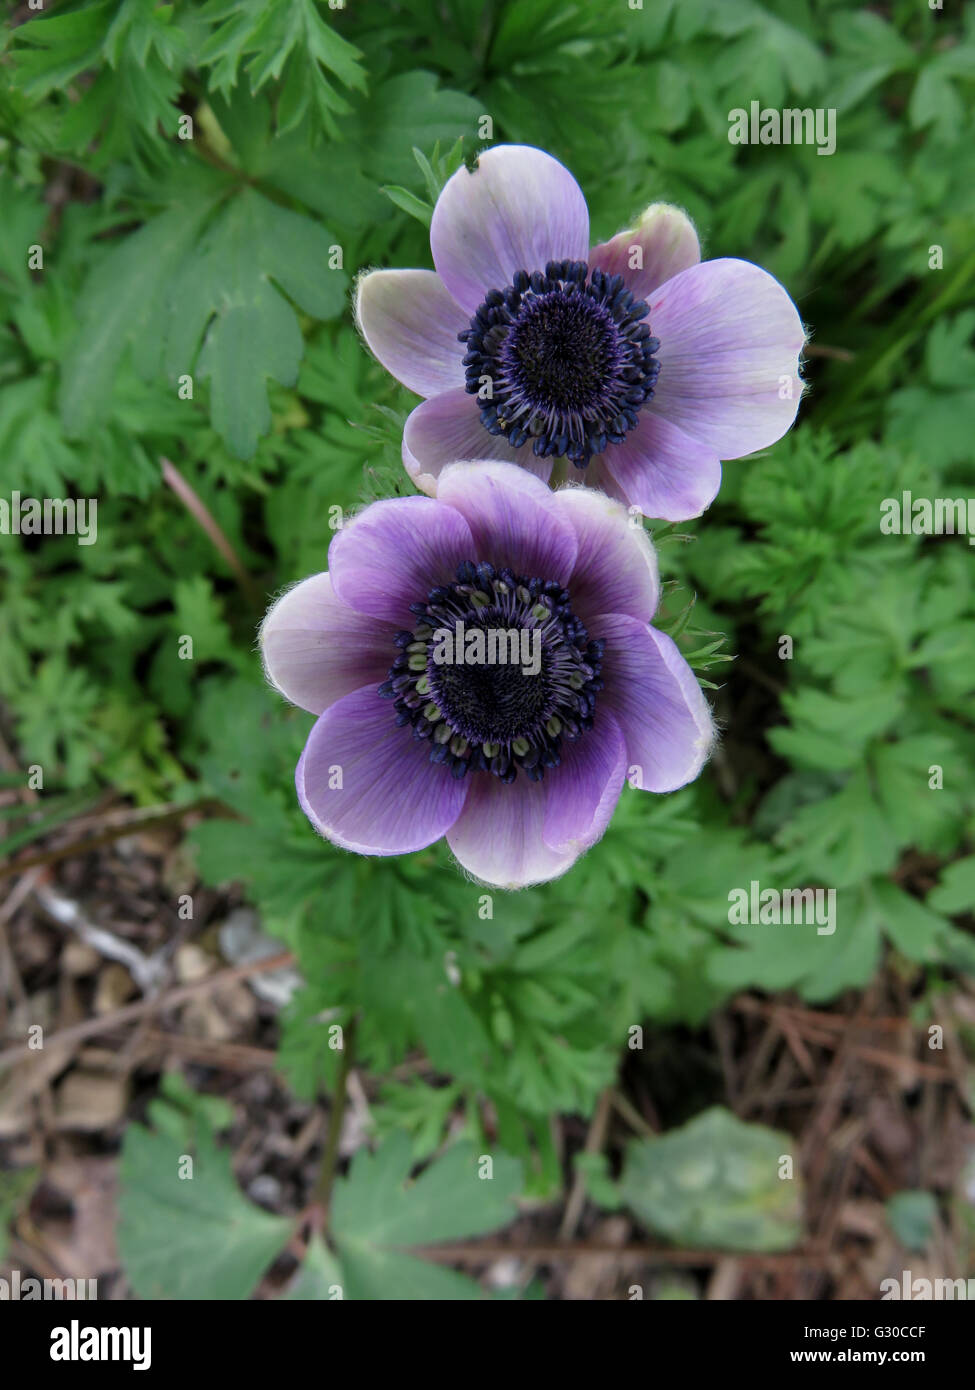 Two purple anemone (Anemone coronaria) flowers with leaves, from above Stock Photo